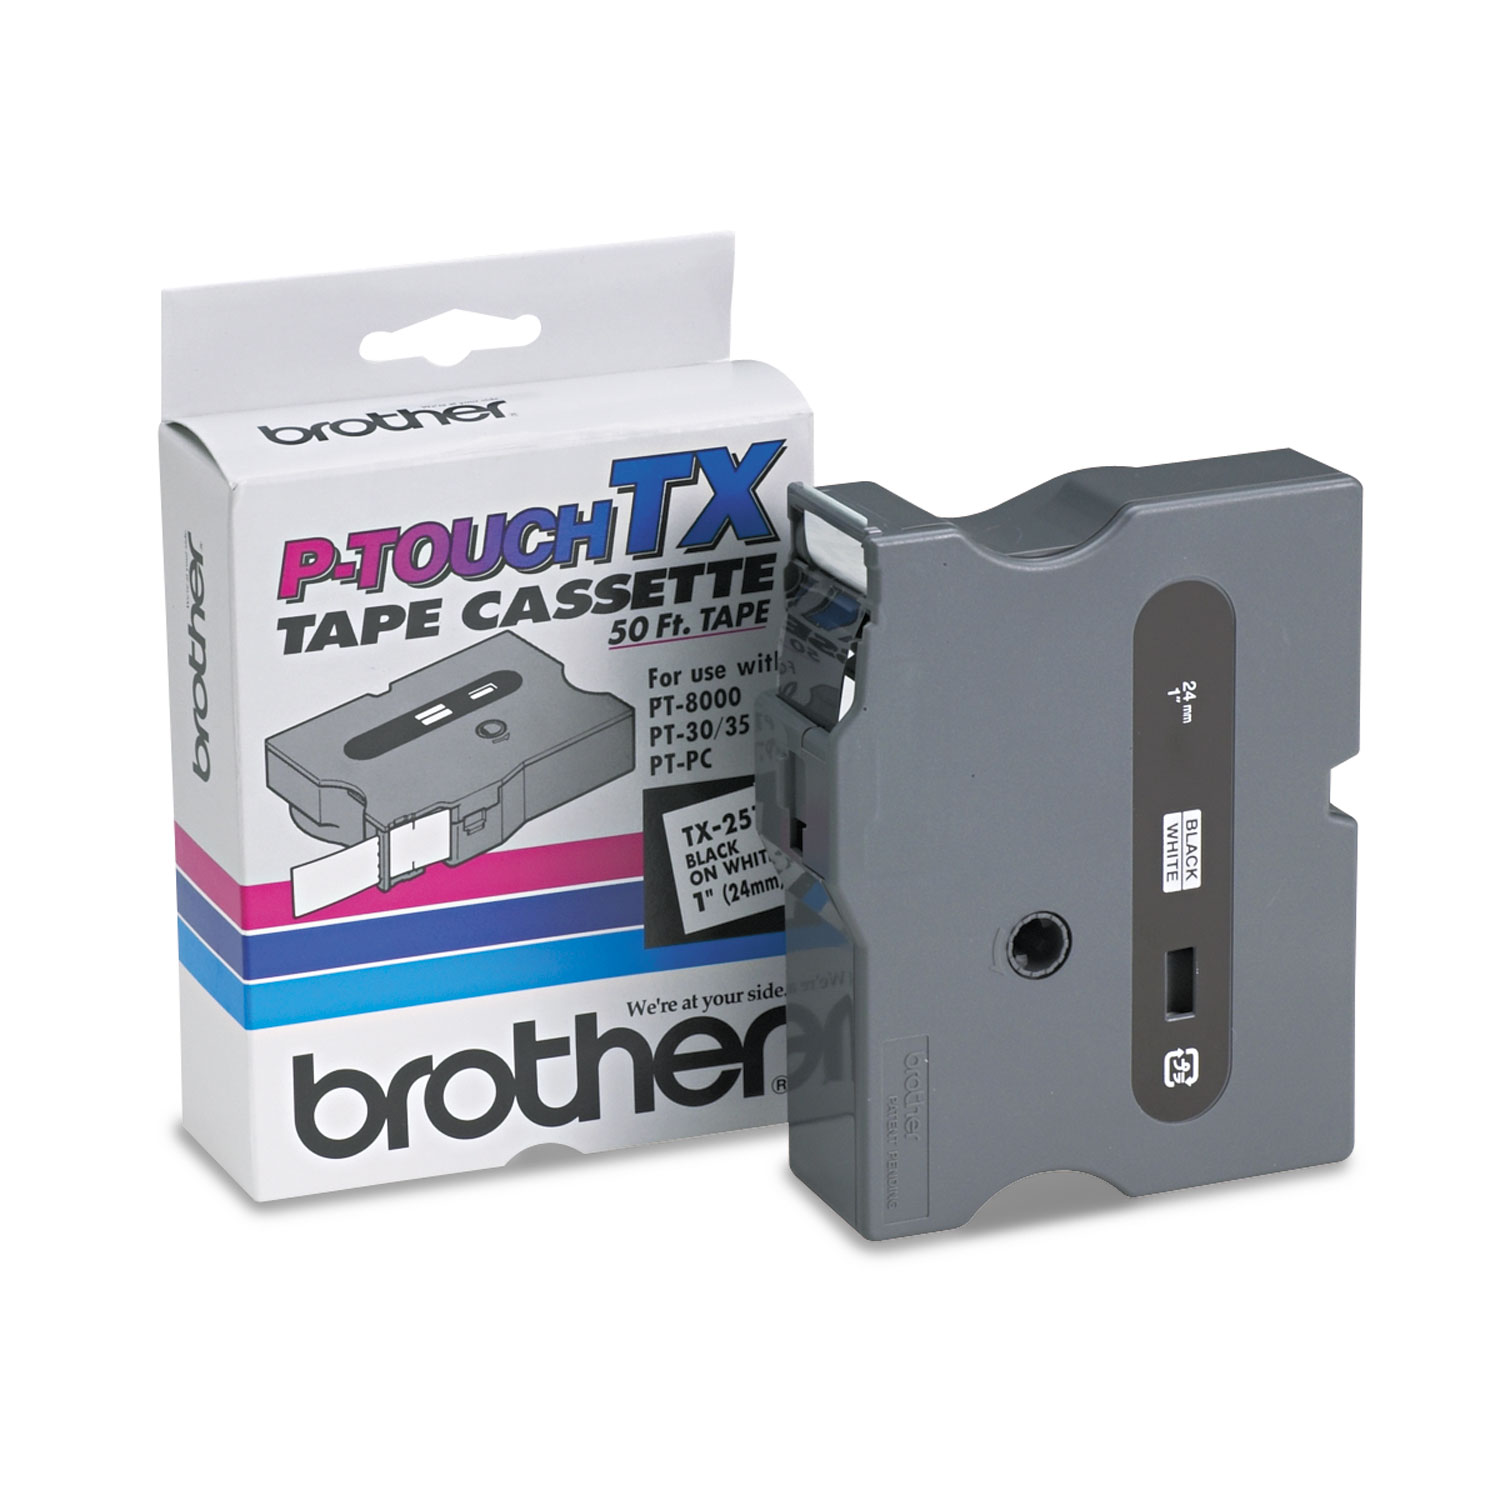  Brother P-Touch TX2511 TX Tape Cartridge for PT-8000, PT-PC, PT-30/35, 1 x 50 ft, Black on White (BRTTX2511) 